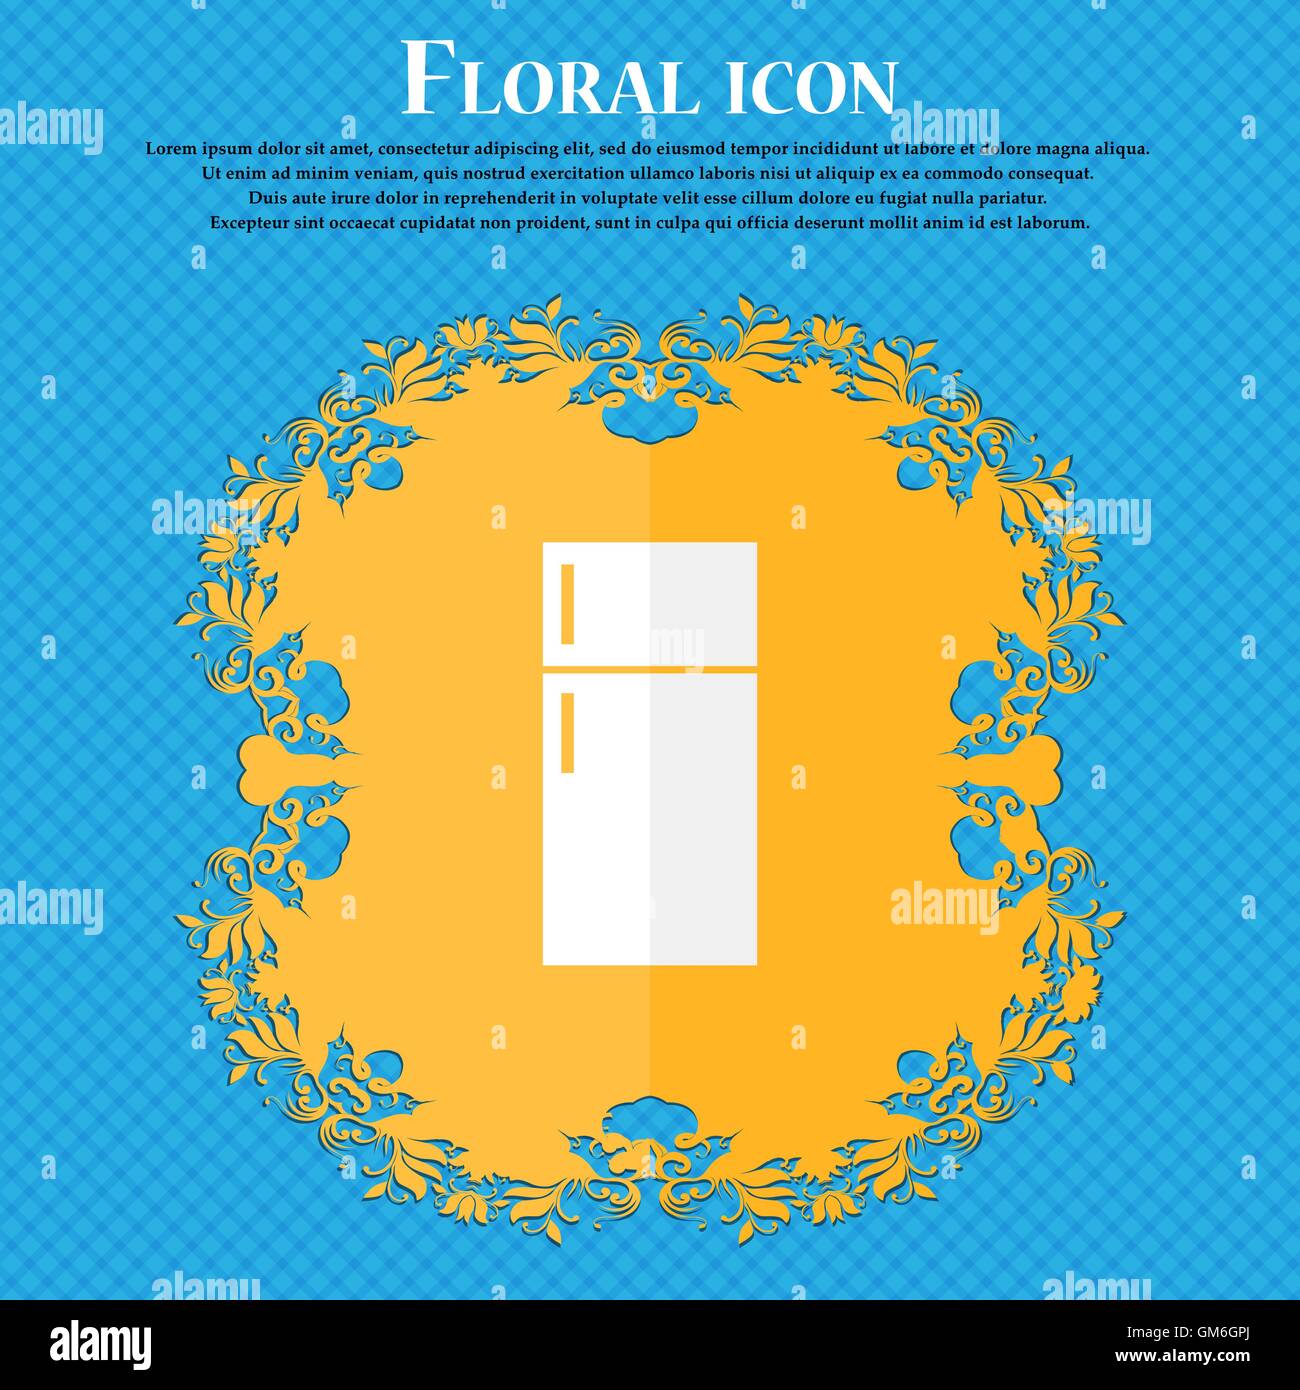 Refrigerator icon sign. Floral flat design on a blue abstract background with place for your text. Vector Stock Vector